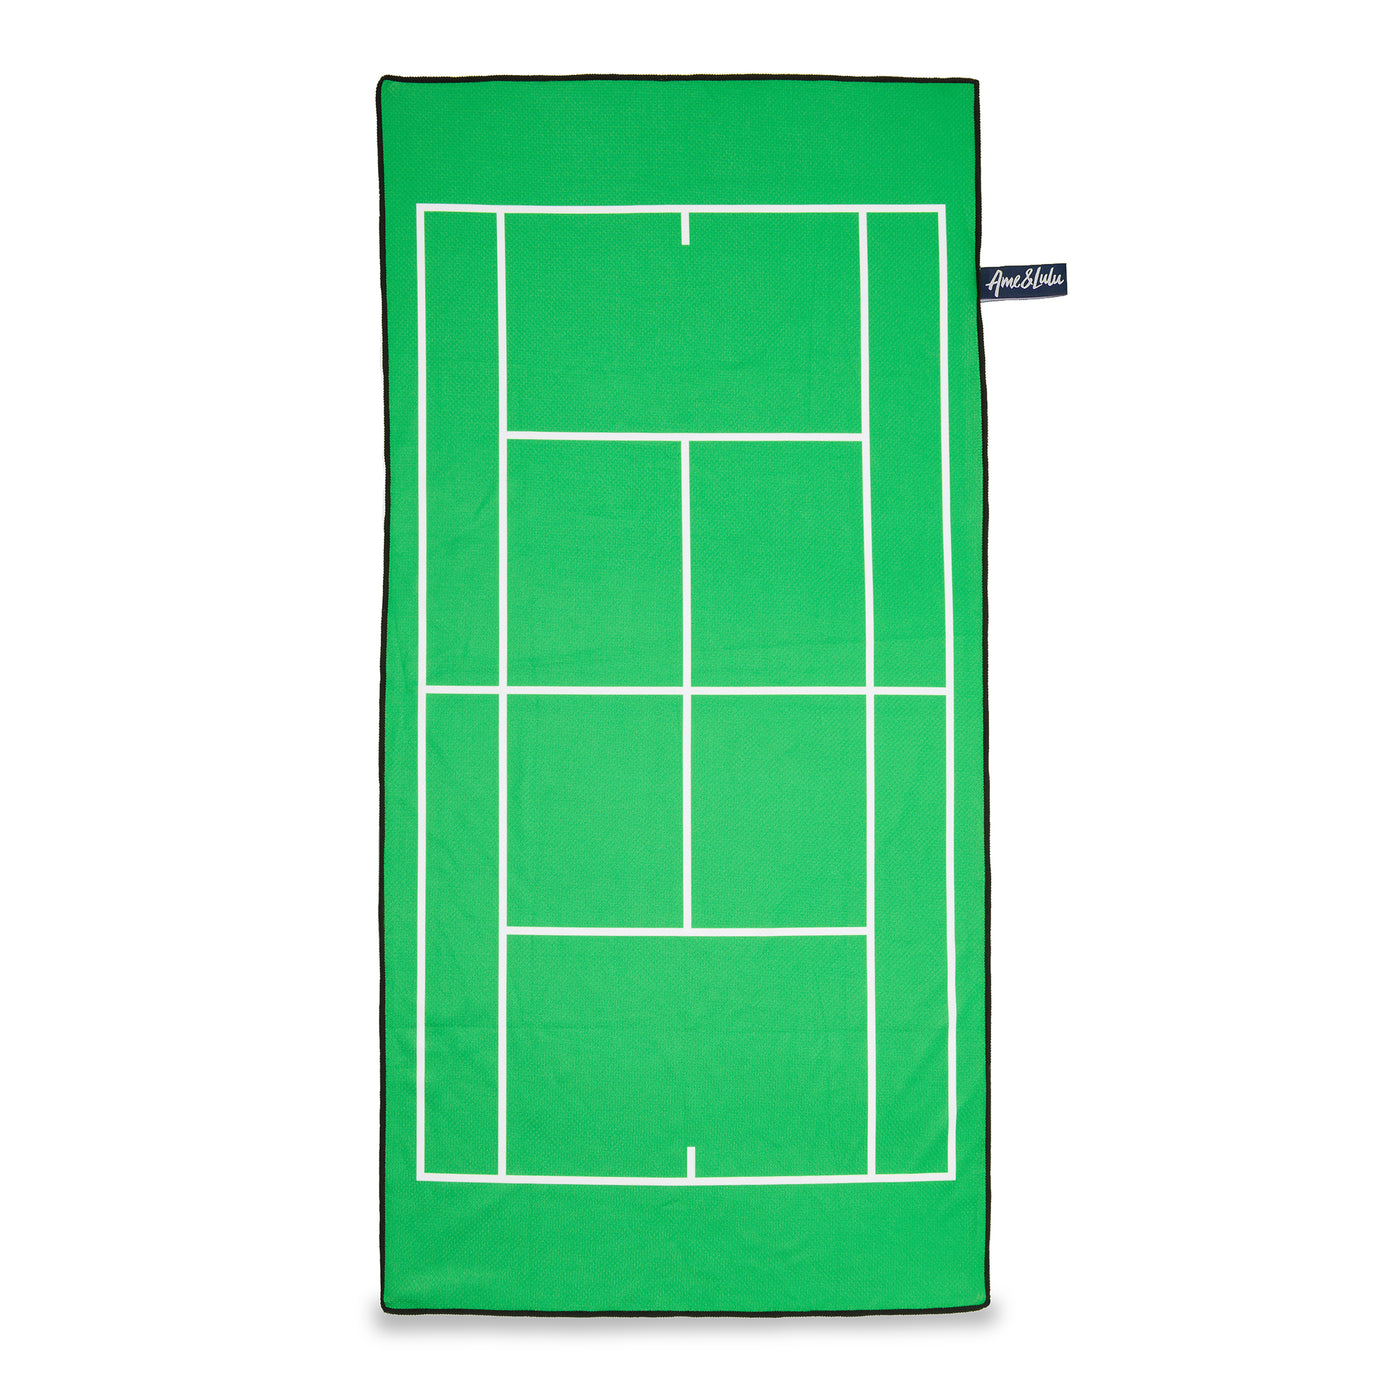 Green rectangular towel with navy trim and white tennis court printed on front.